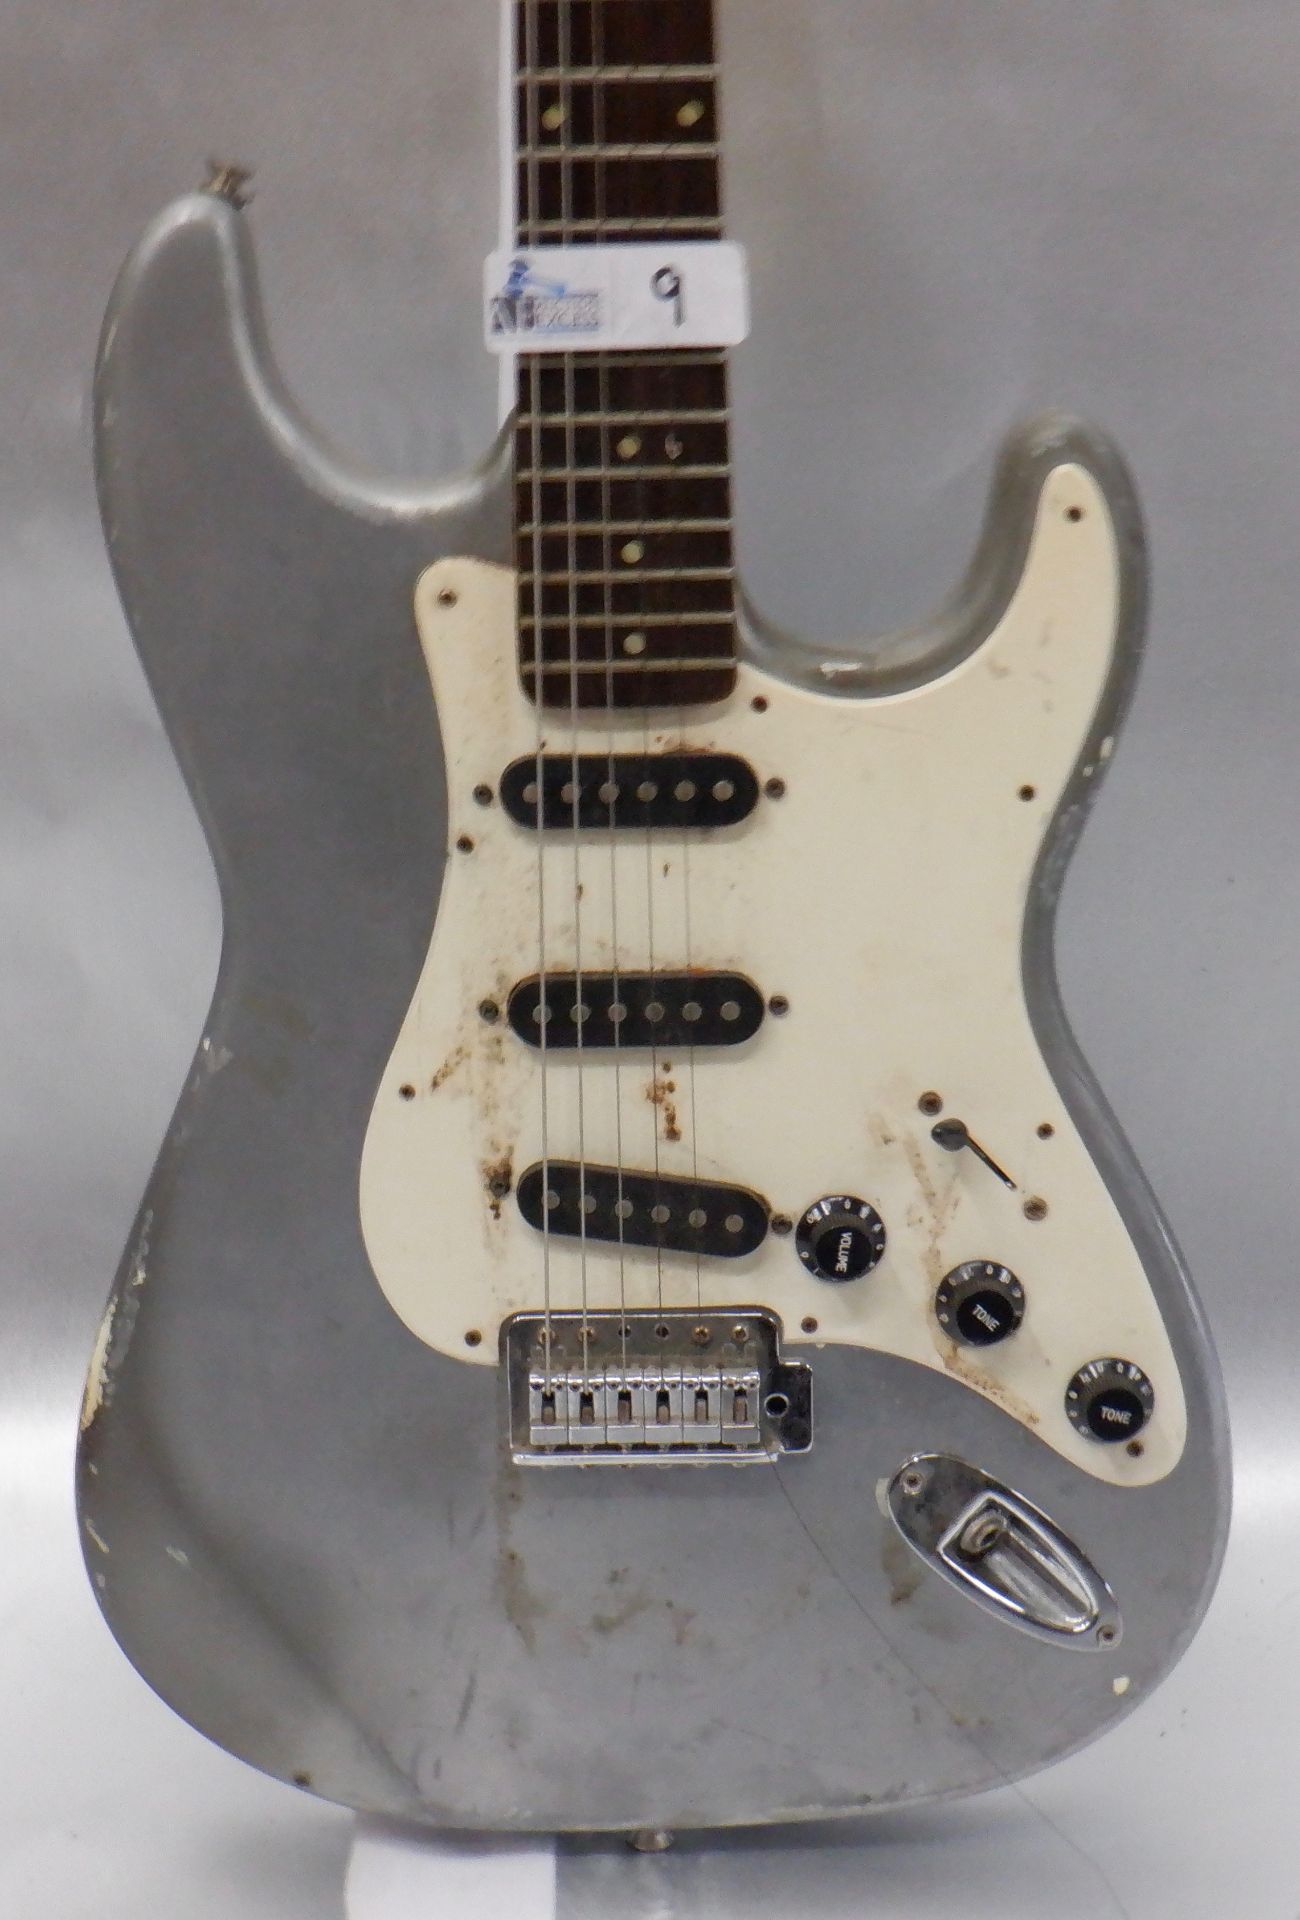 HONDO II STRAT GUITAR WITH SOFT CASE - Image 3 of 7